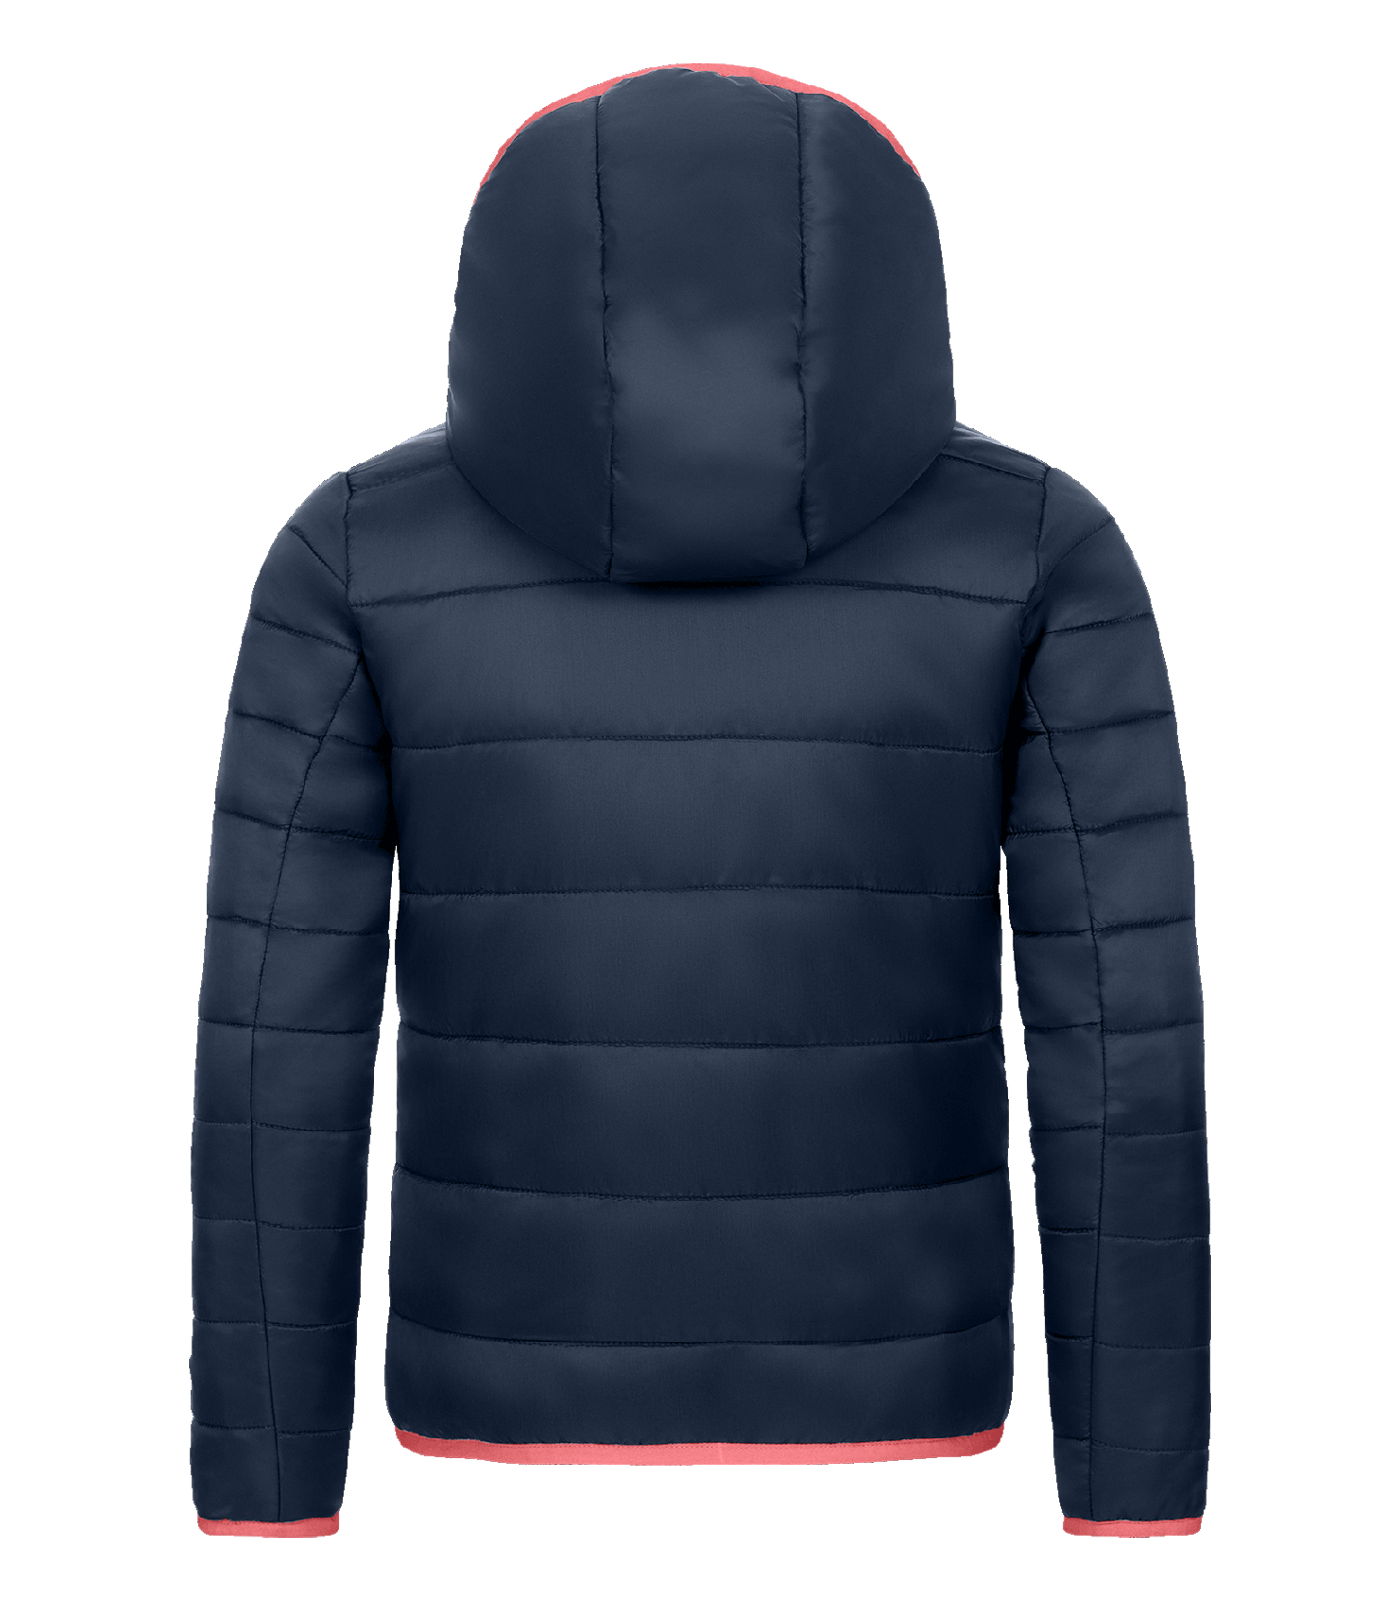 Lucky Liv Quilted Jacket, kids